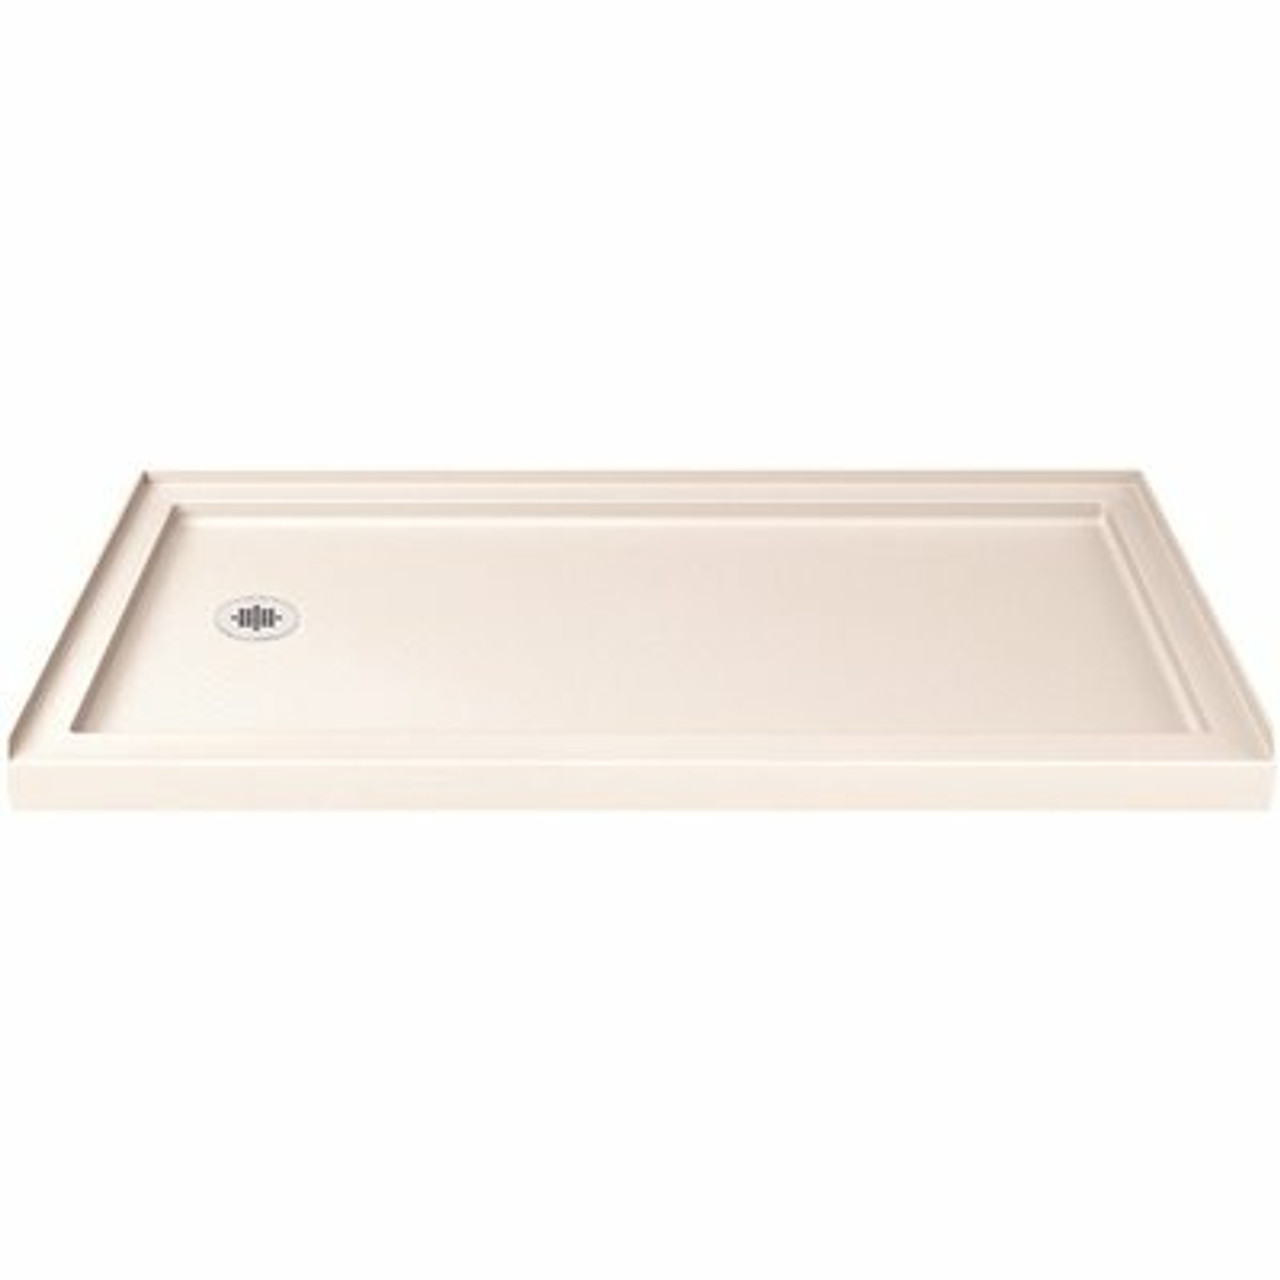 Dreamline Slimline 36 In. D X 60 In. W Single Threshold Shower Base In Biscuit With Left Hand Drain